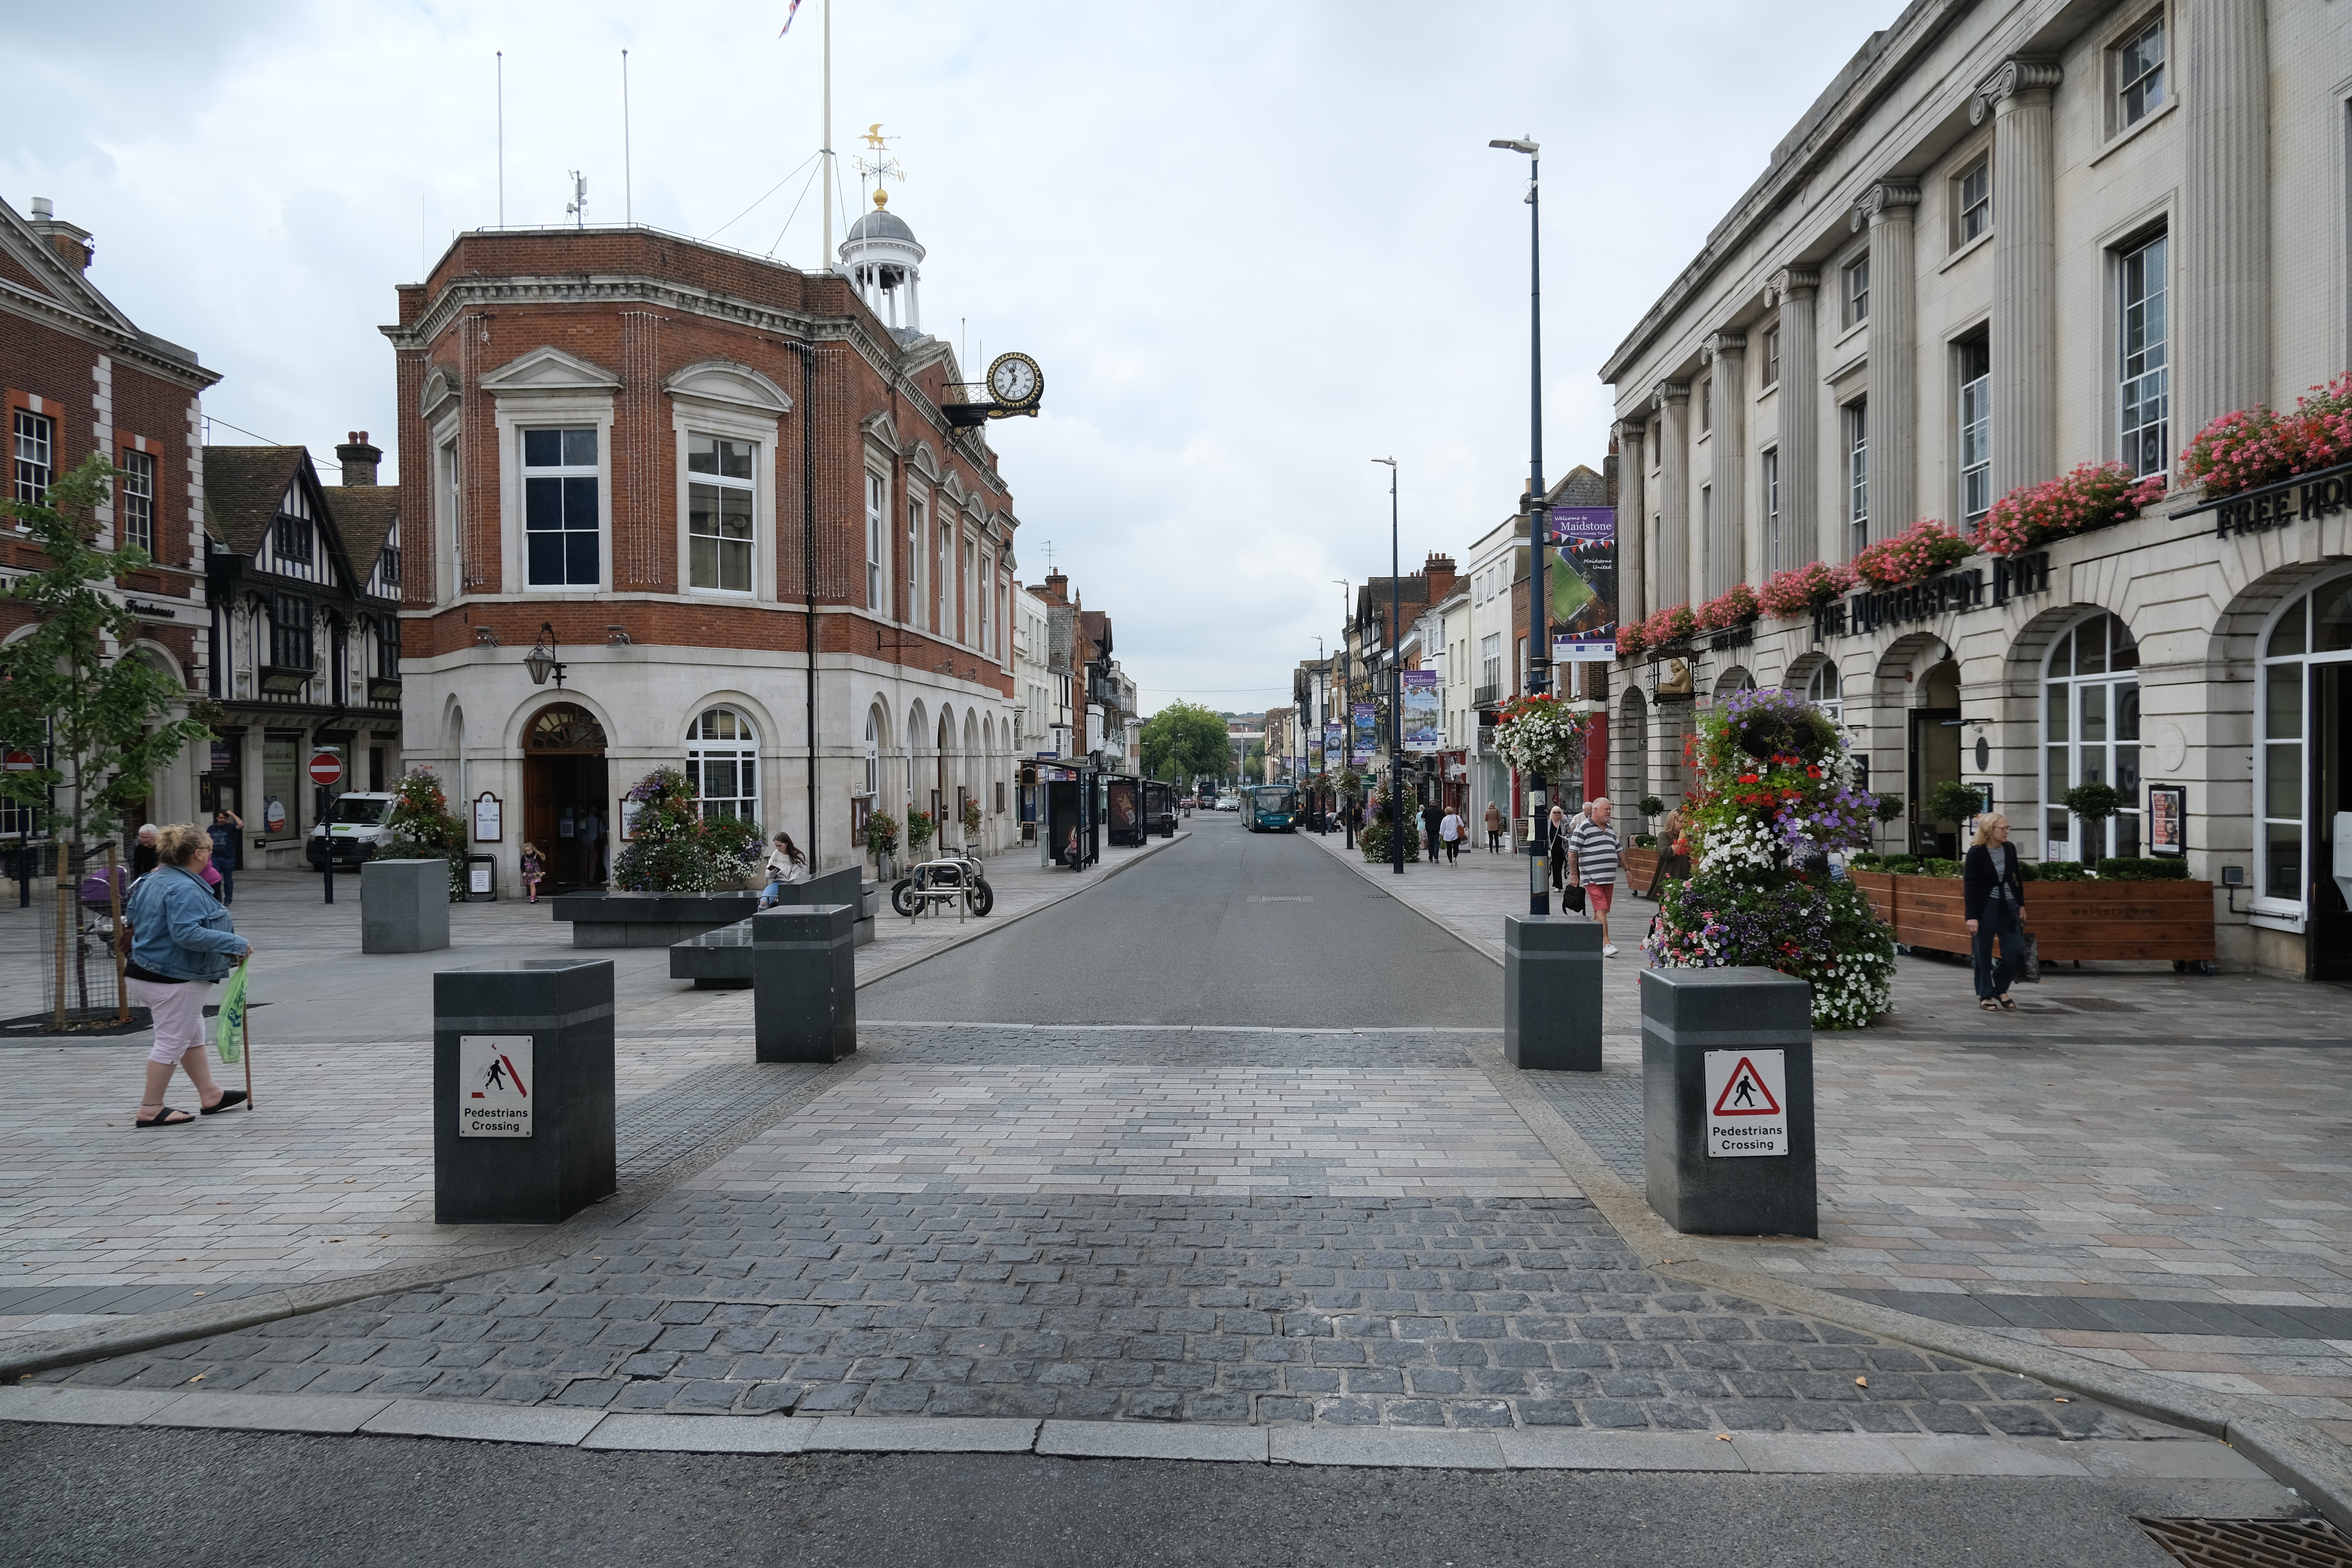 Have your say on measures to reduce antisocial behaviour in the town centre